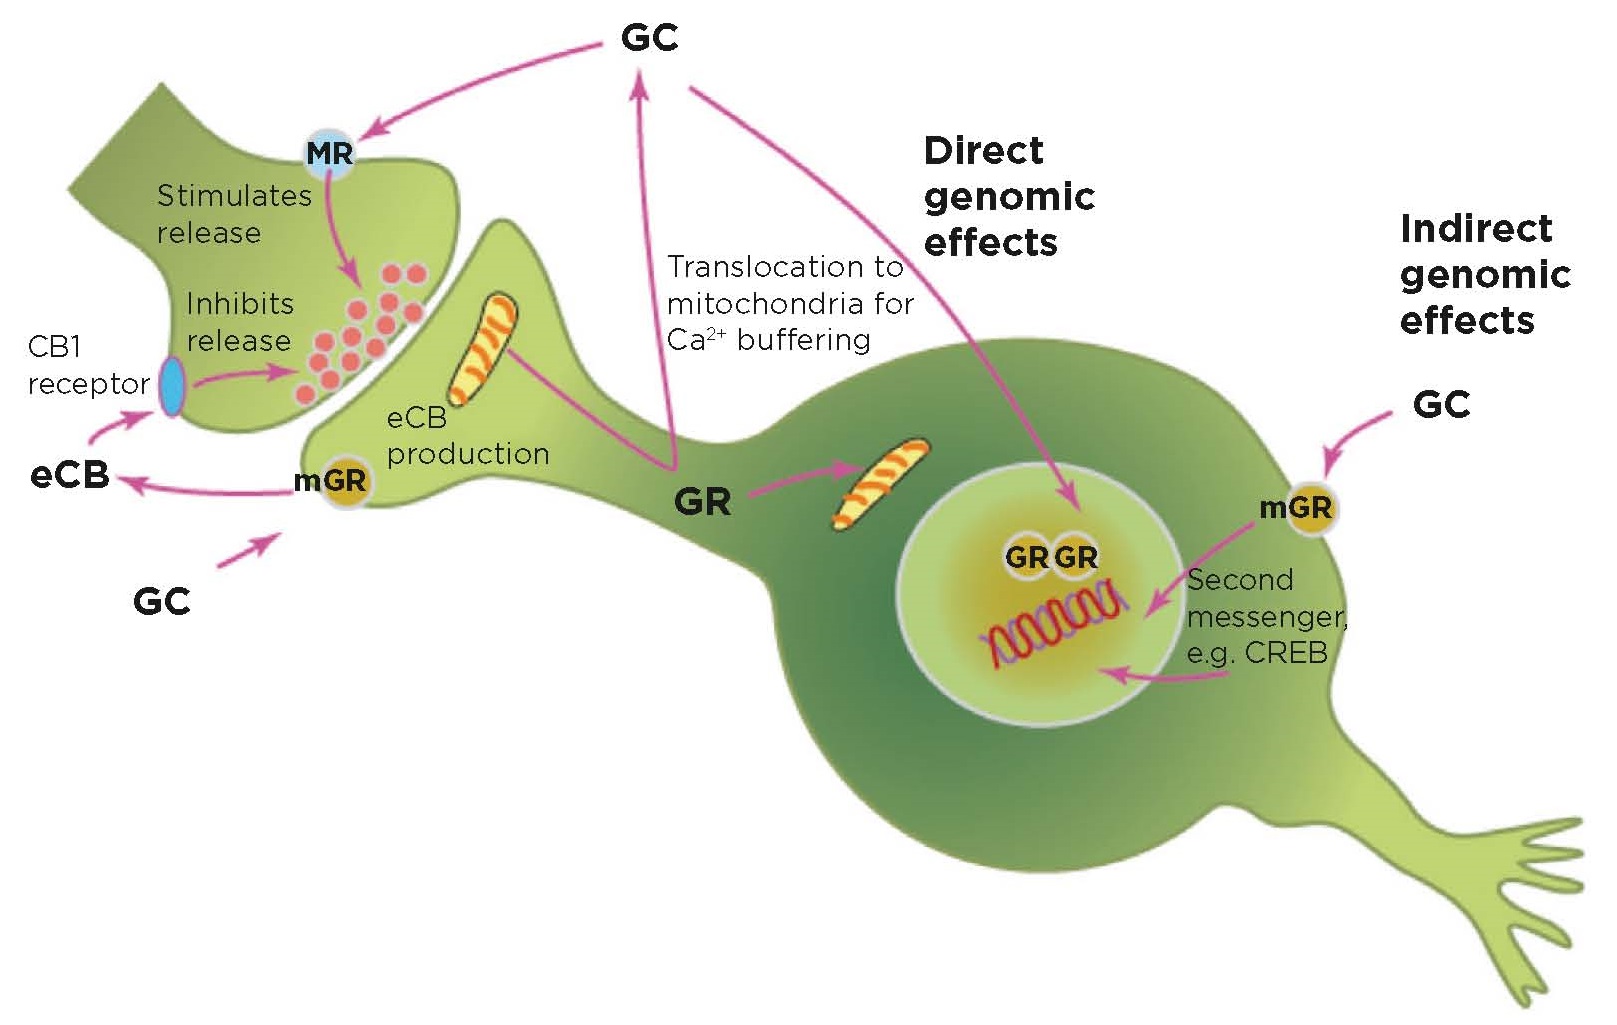 Figure 2. Glucocorticoids (GC) have multiple roles and mechanisms of action besides direct and indirect genomic regulation. These include mediating direct release of the neurotransmitter glutamate, activation of endocannabinoid (eCB) secretion that feeds back on presynaptic glutamate and GABA (γ-aminobutyric acid) release, and actions on mitochondria. &#169;BS McEwen